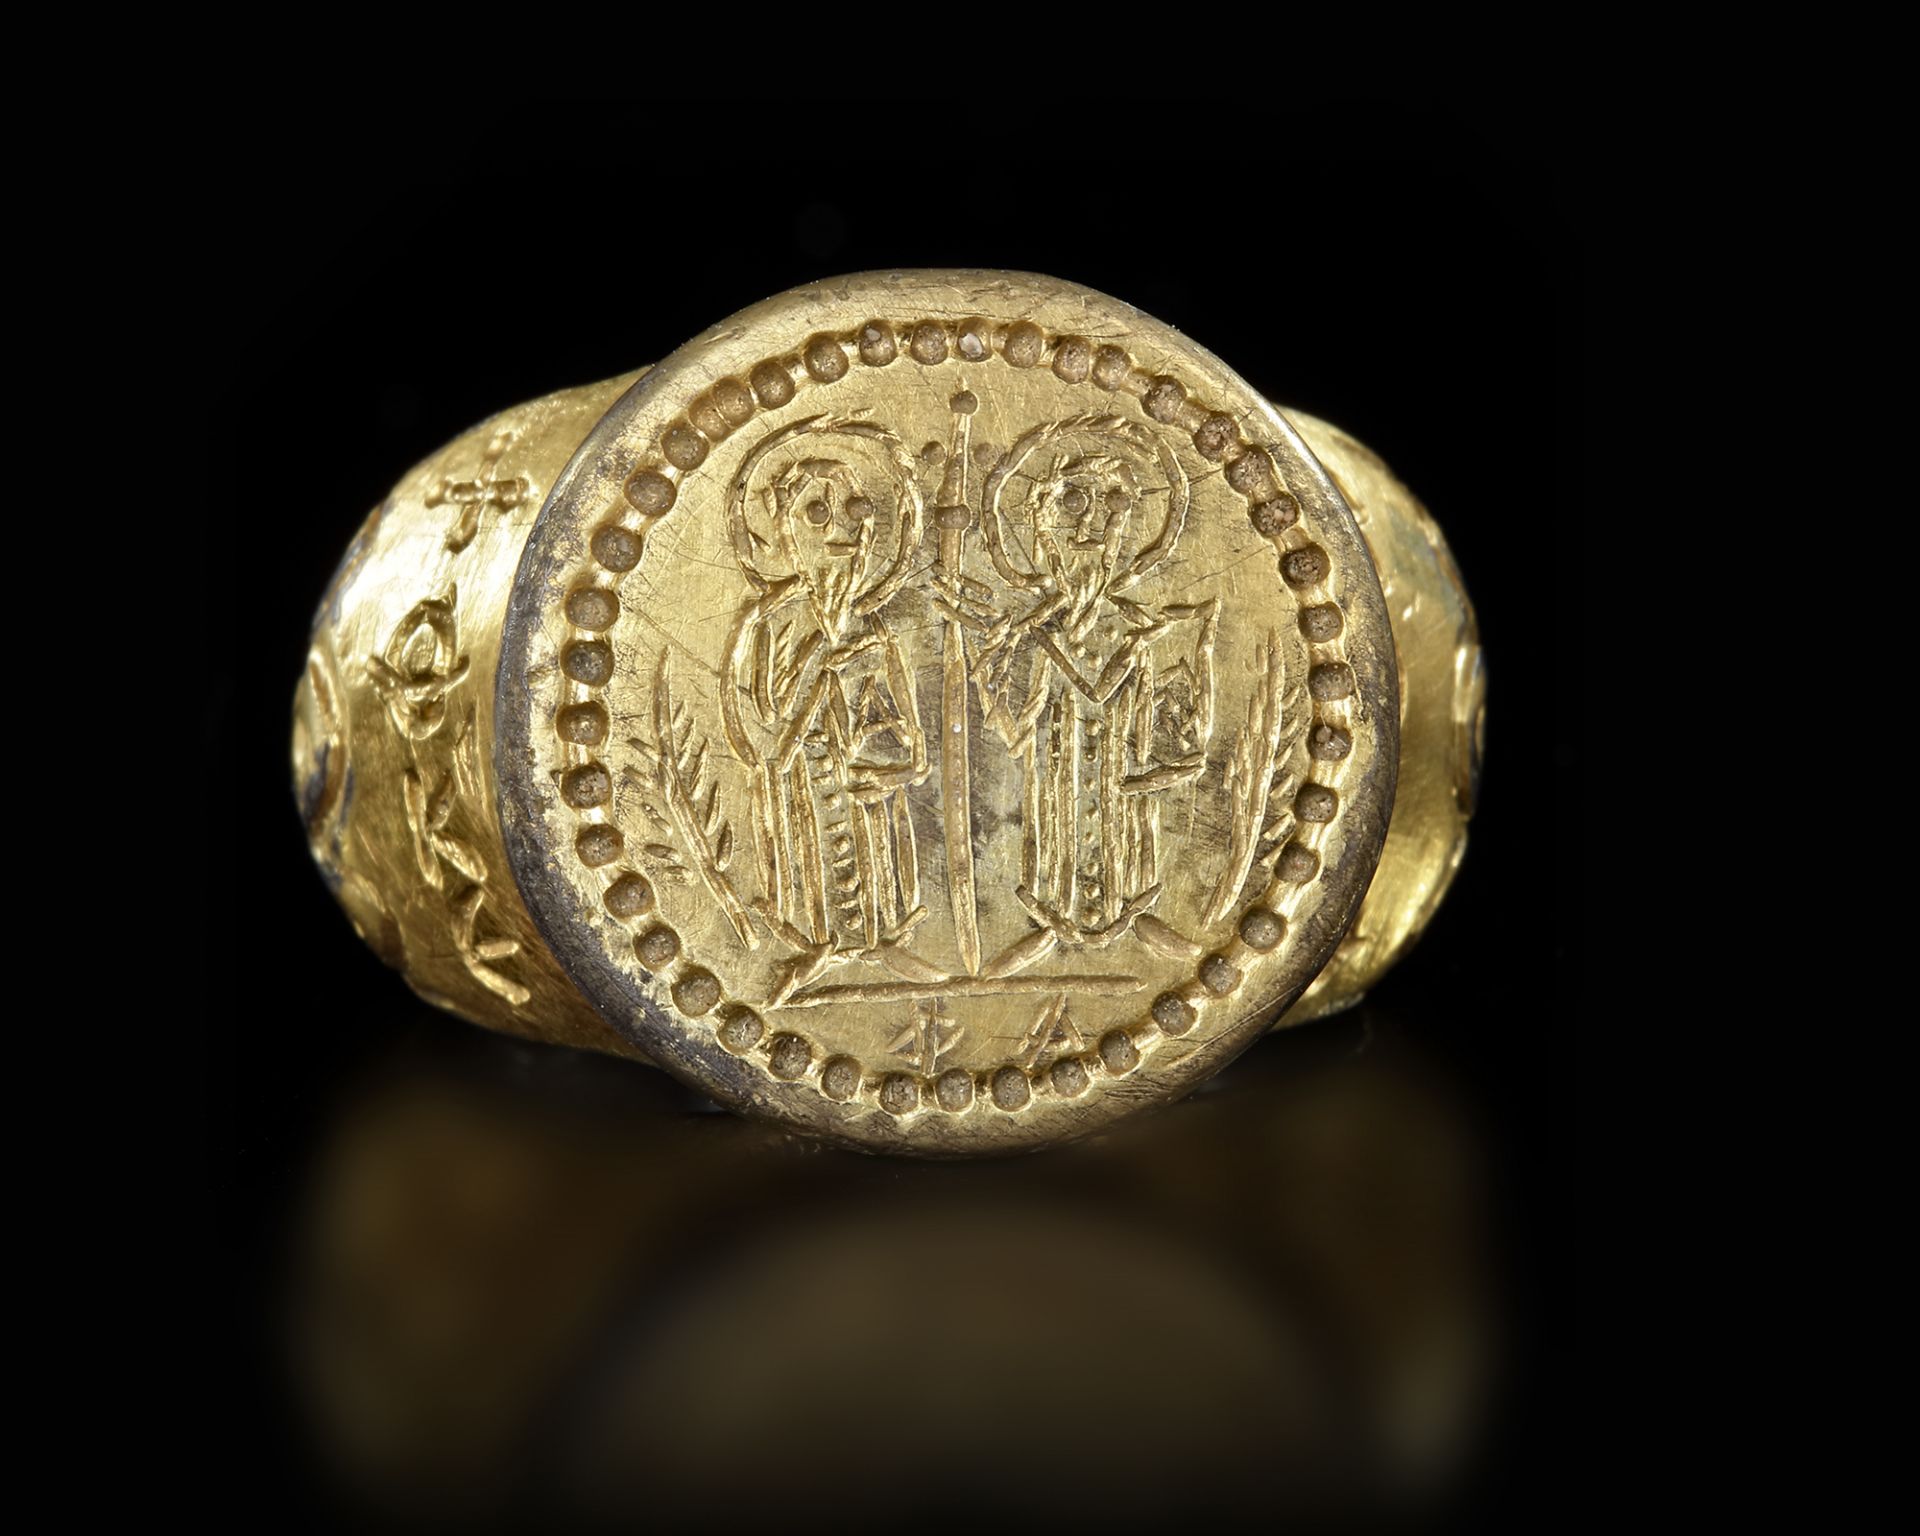 A LARGE SILVER GILT BYZANTINE RING, 8TH-10TH CENTURY AD